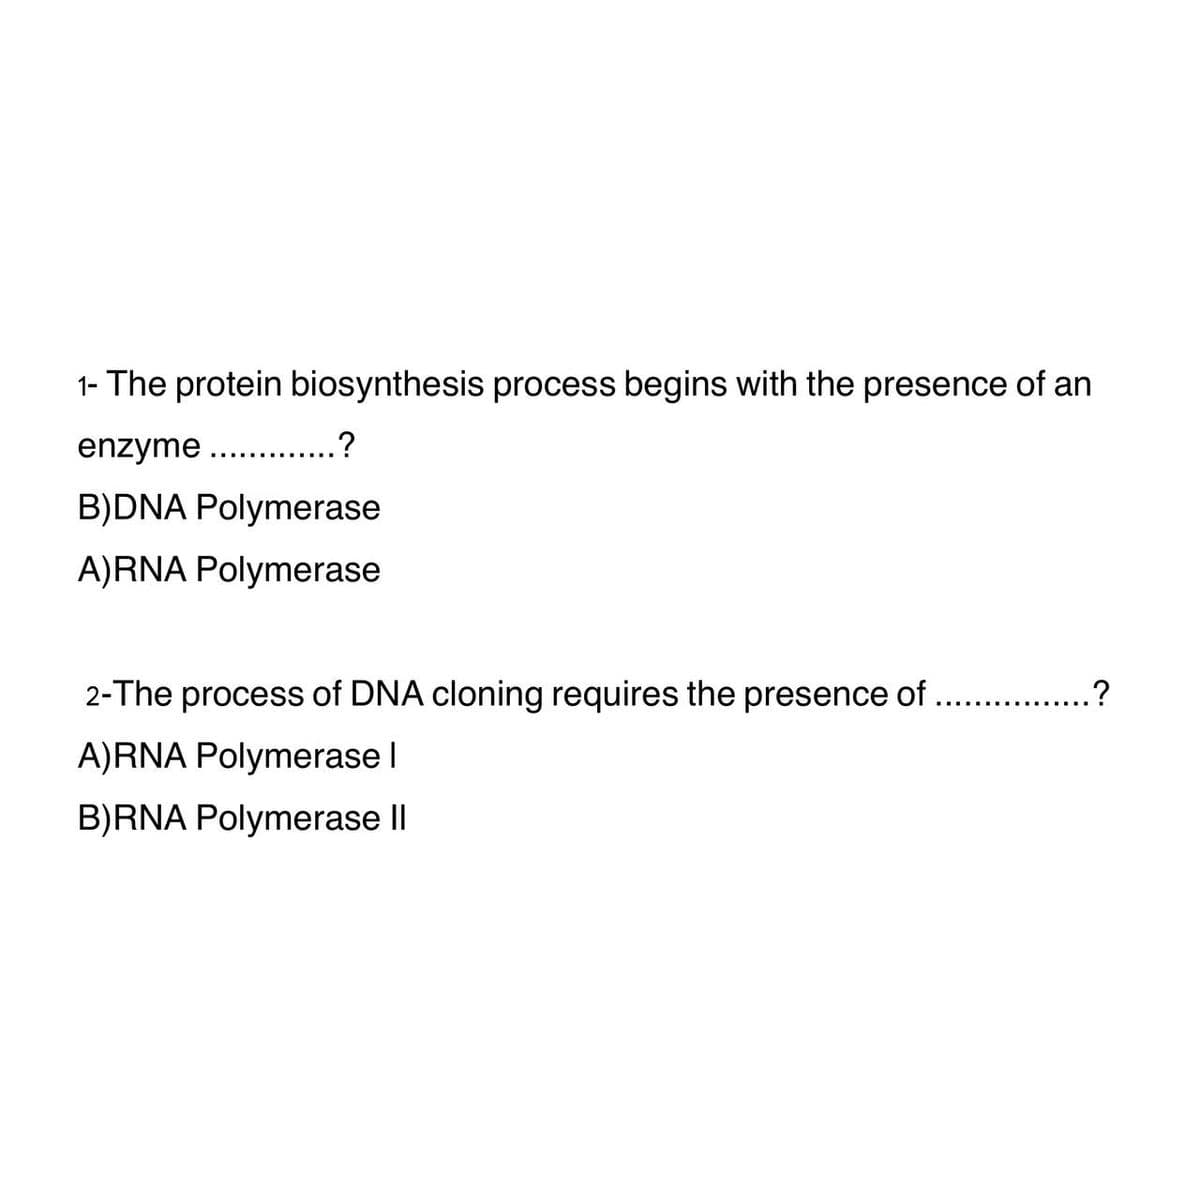 1- The protein biosynthesis process begins with the presence of an
enzyme ..........?
B)DNA Polymerase
A)RNA Polymerase
2-The process of DNA cloning requires the presence of ................?
A)RNA Polymerase I
B)RNA Polymerase II